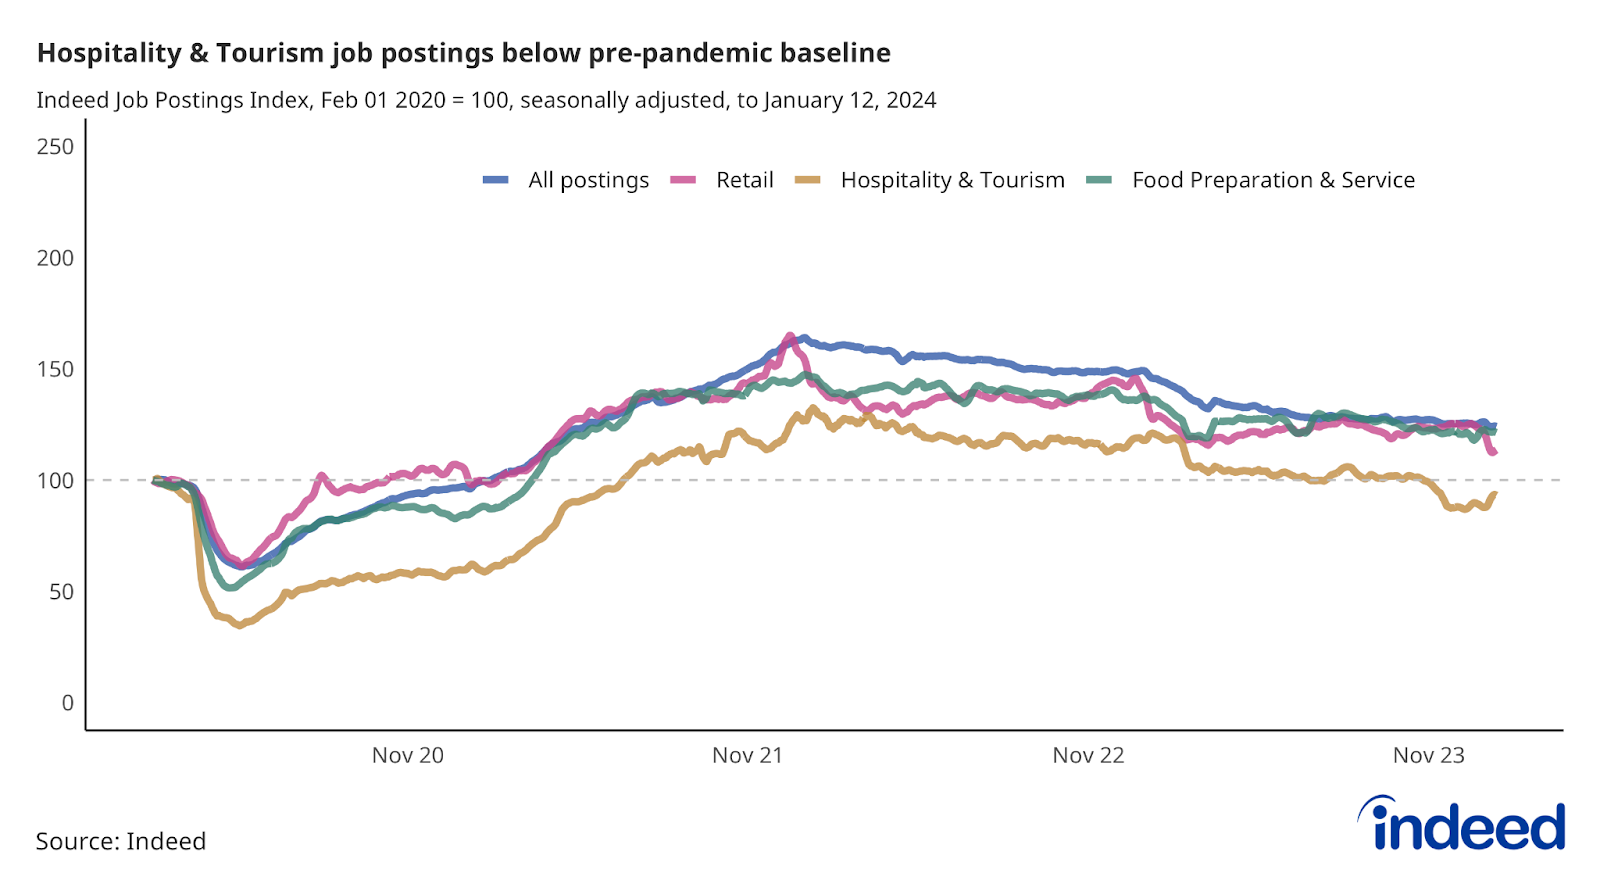 Line chart showing job postings in Retail, Hospitality & Tourism, and Food Preparation & Service to January 12, 2024. Hospitality & Tourism job postings have now dipped below their pre-pandemic level. 